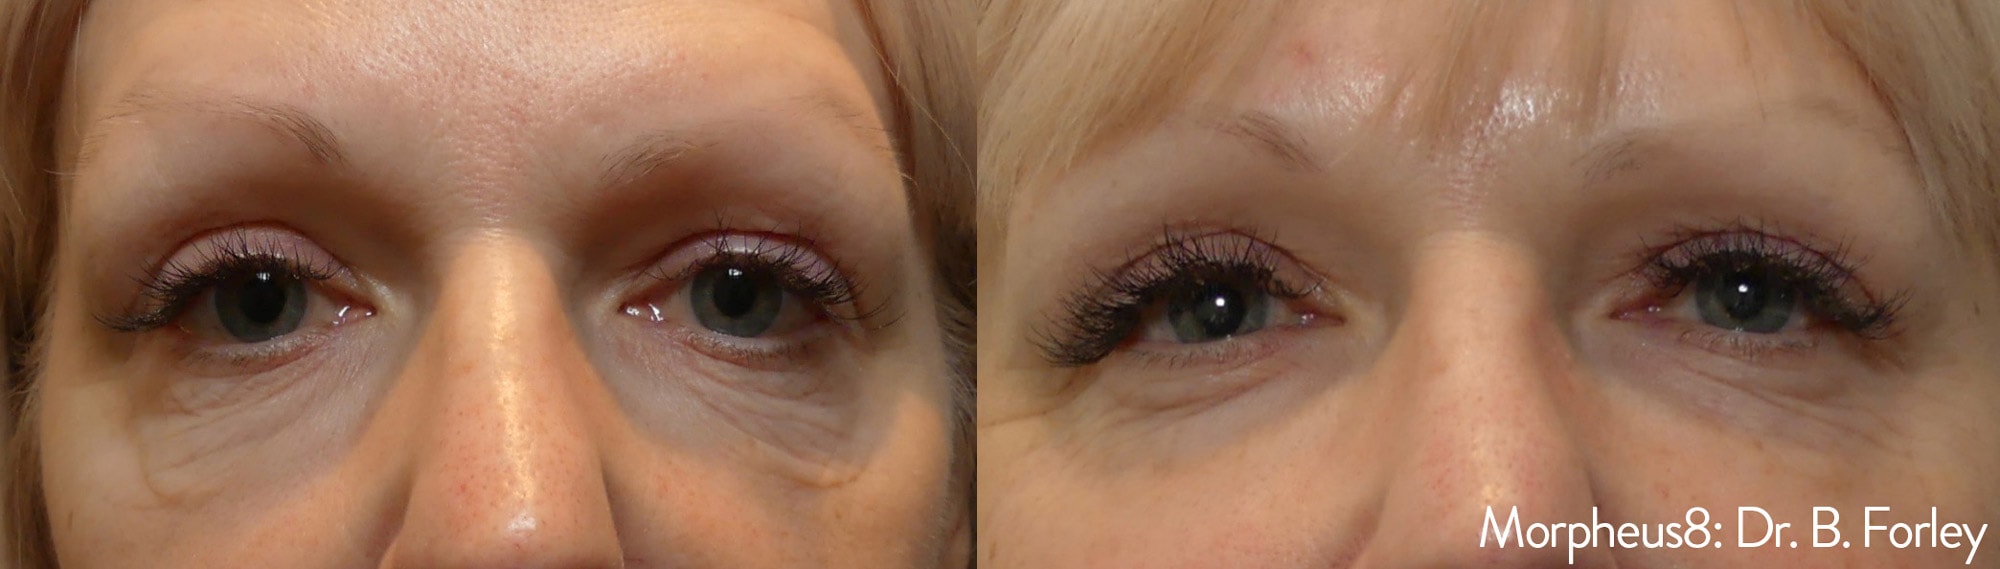 Before and After photos of Morpheus8 treatments eliminating bags and tightening loose skin around a woman’s eyes